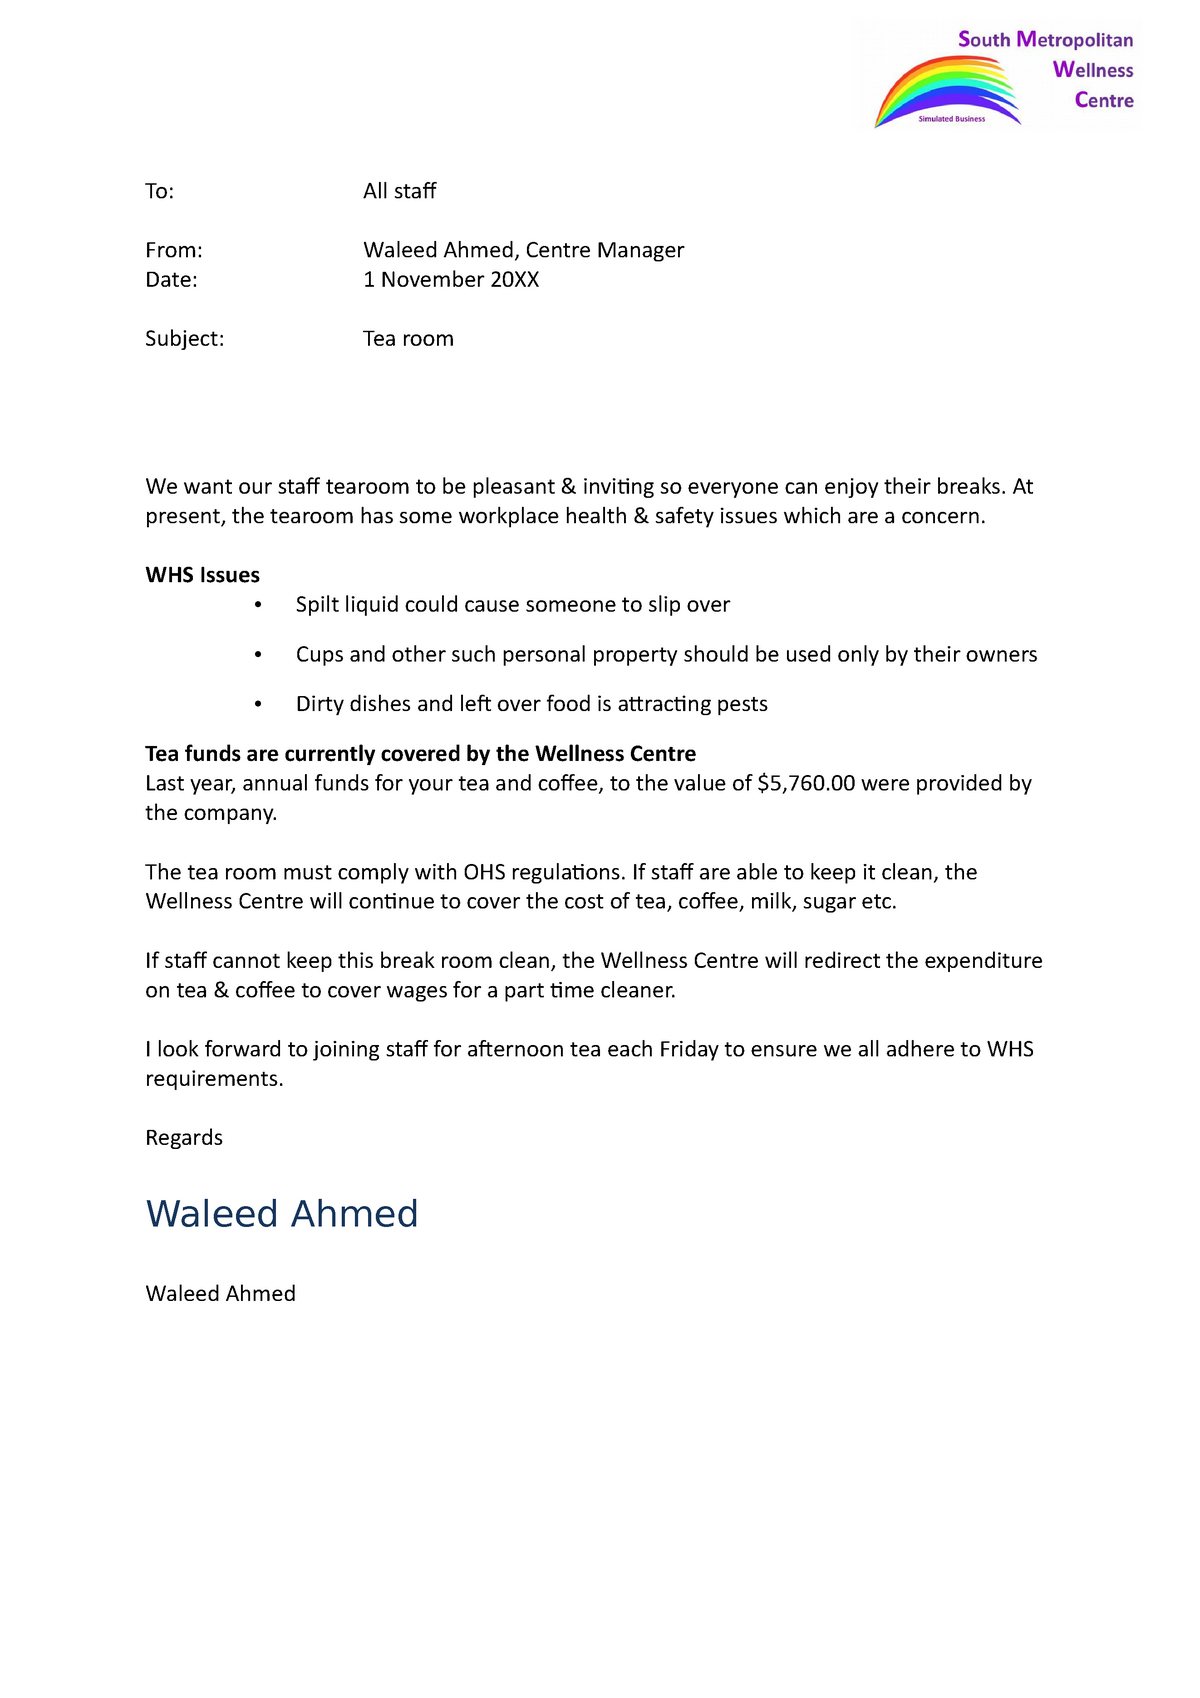 smwc-email-template-to-all-staf-from-waleed-ahmed-centre-manager-date-1-november-20xx